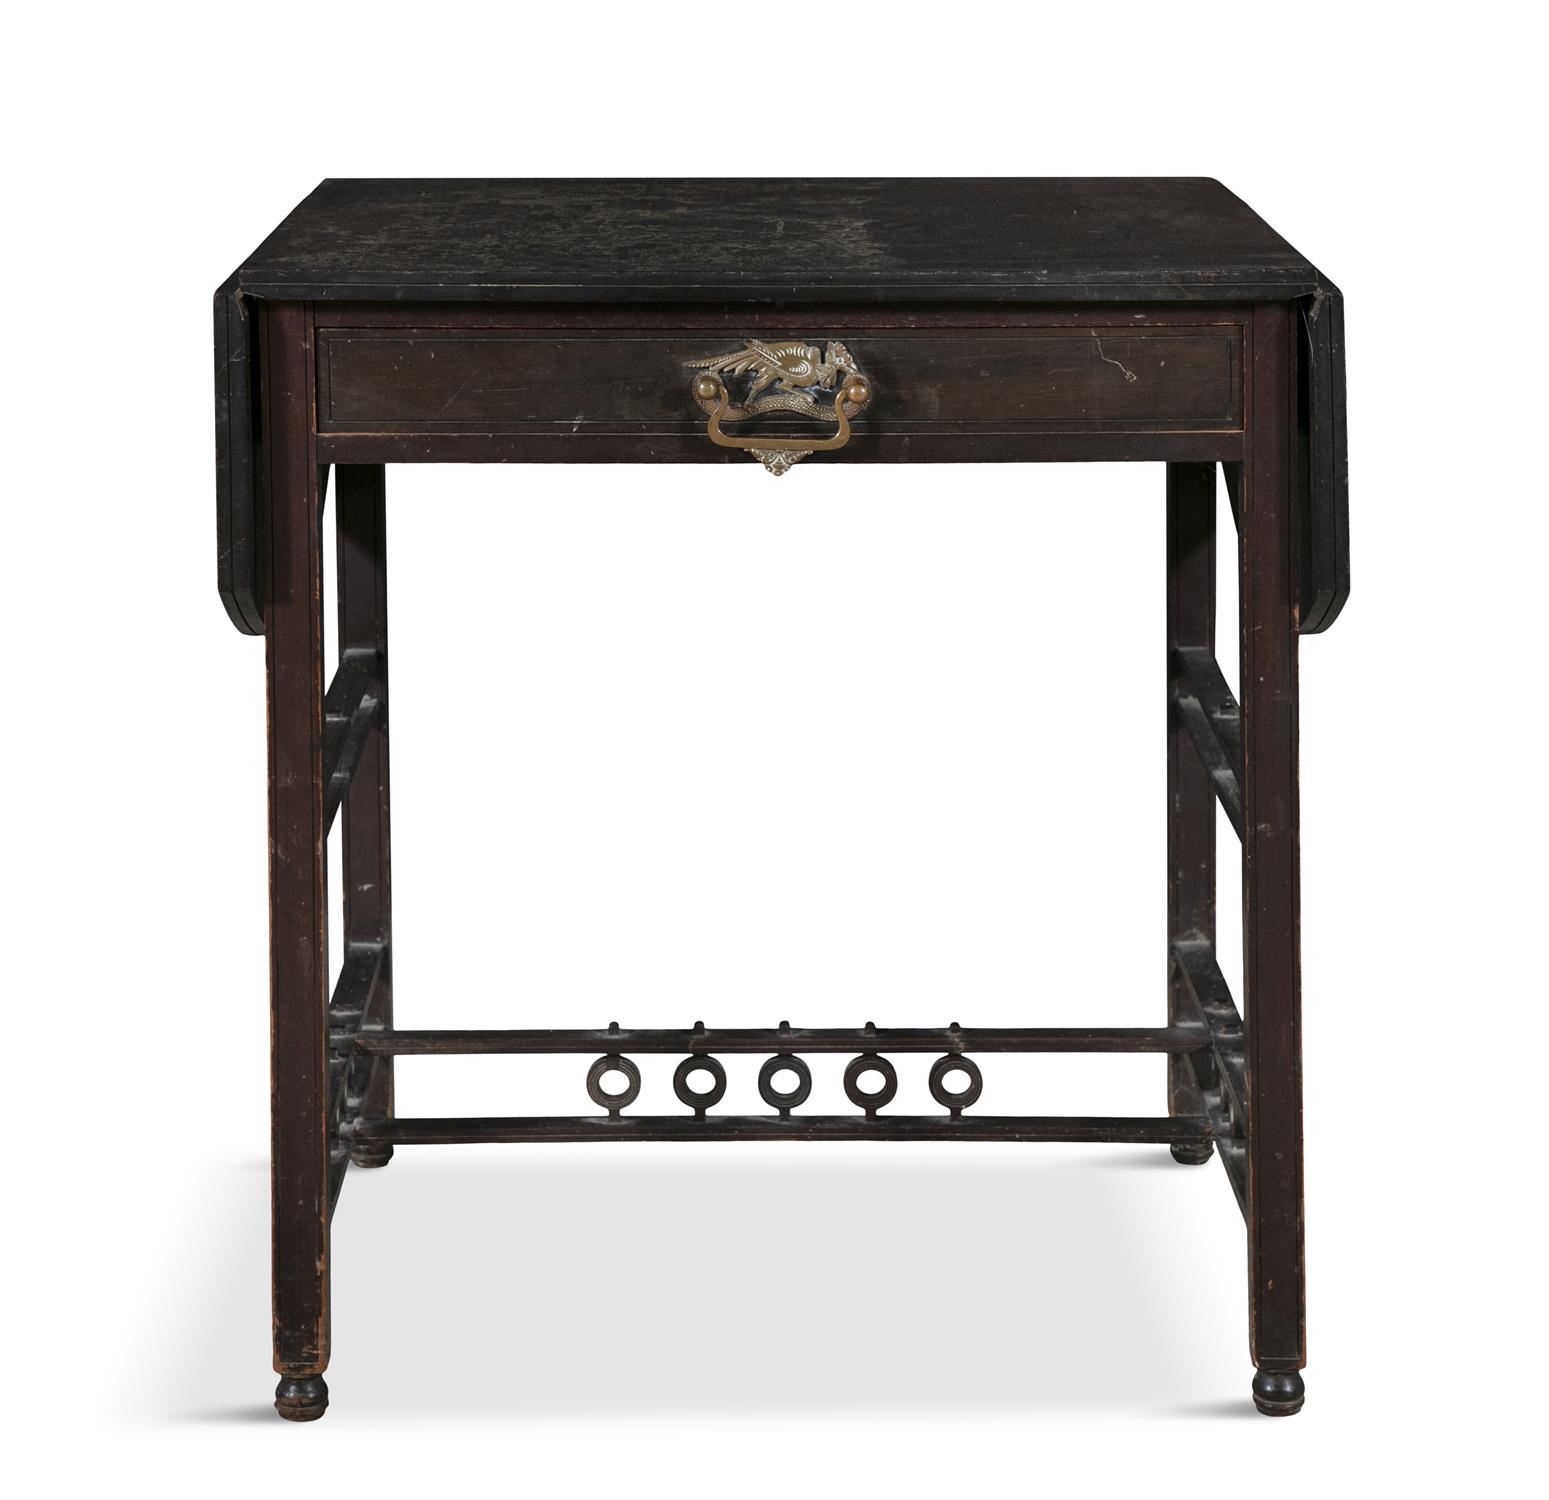 A MAHAGONY PEMBROKE TABLE, PHILADELPHIA, CIRCA 1770 the channel lined top above a frieze drawer